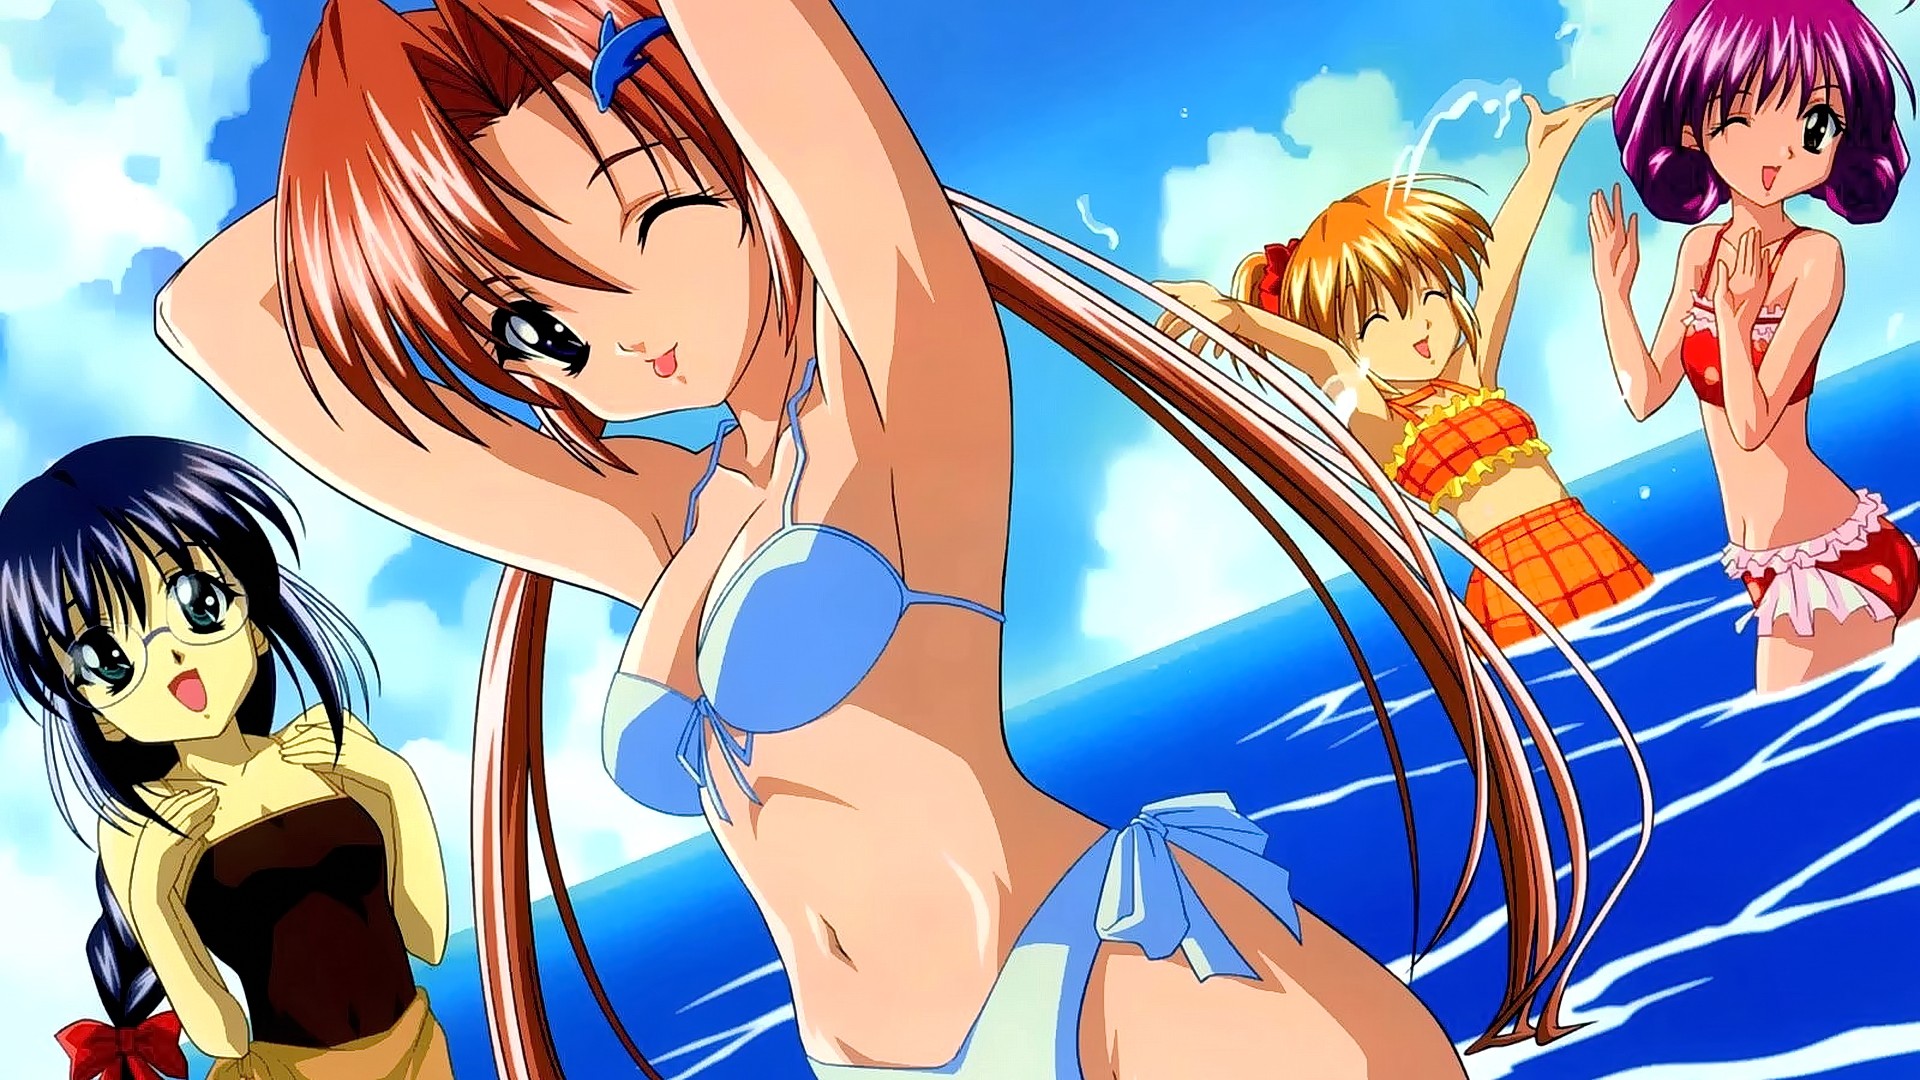 Anime 1920x1080 anime anime girls brunette short hair long hair smiling wink bikini water sky clouds looking at viewer Sister Princess group of women belly tongues tongue out blue bikini swimwear arms up in water one eye closed